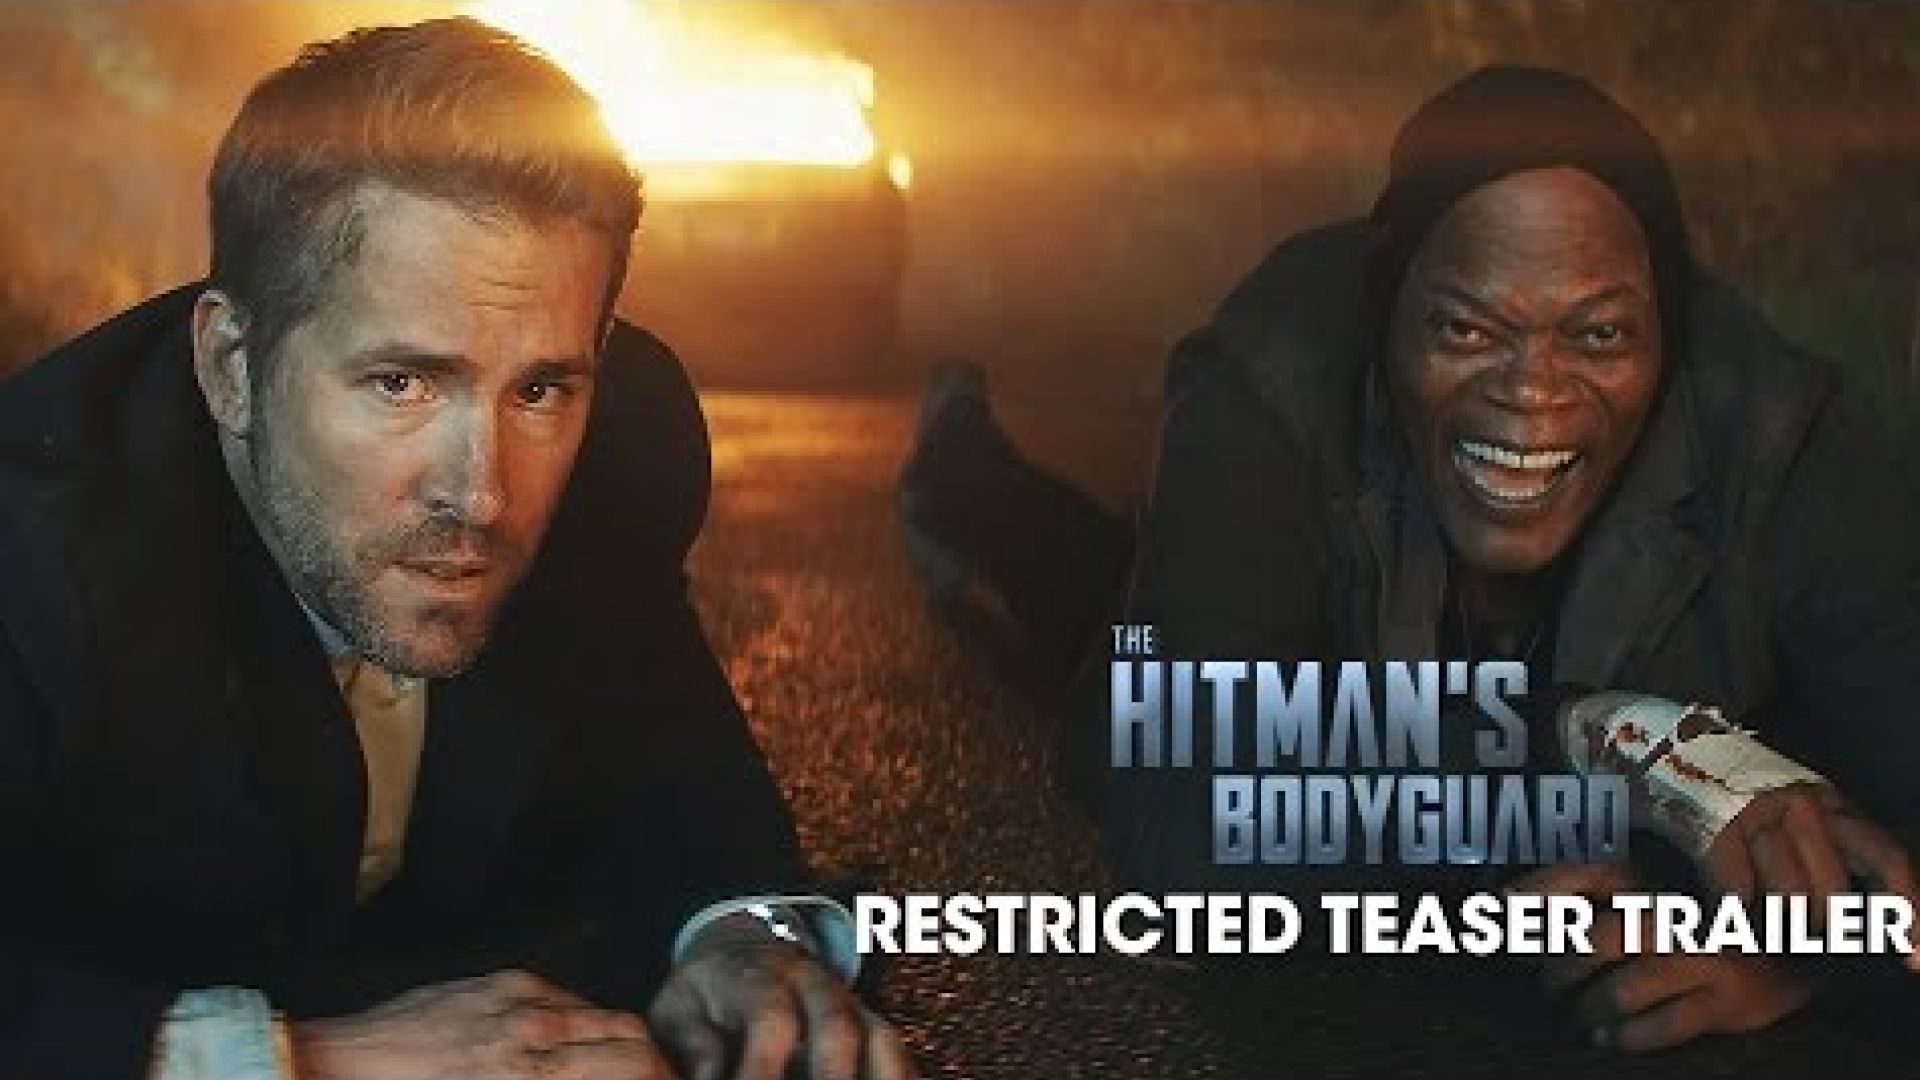 Check out the red band trailer of &#039;The Hitman’s Bodyguard&#039;